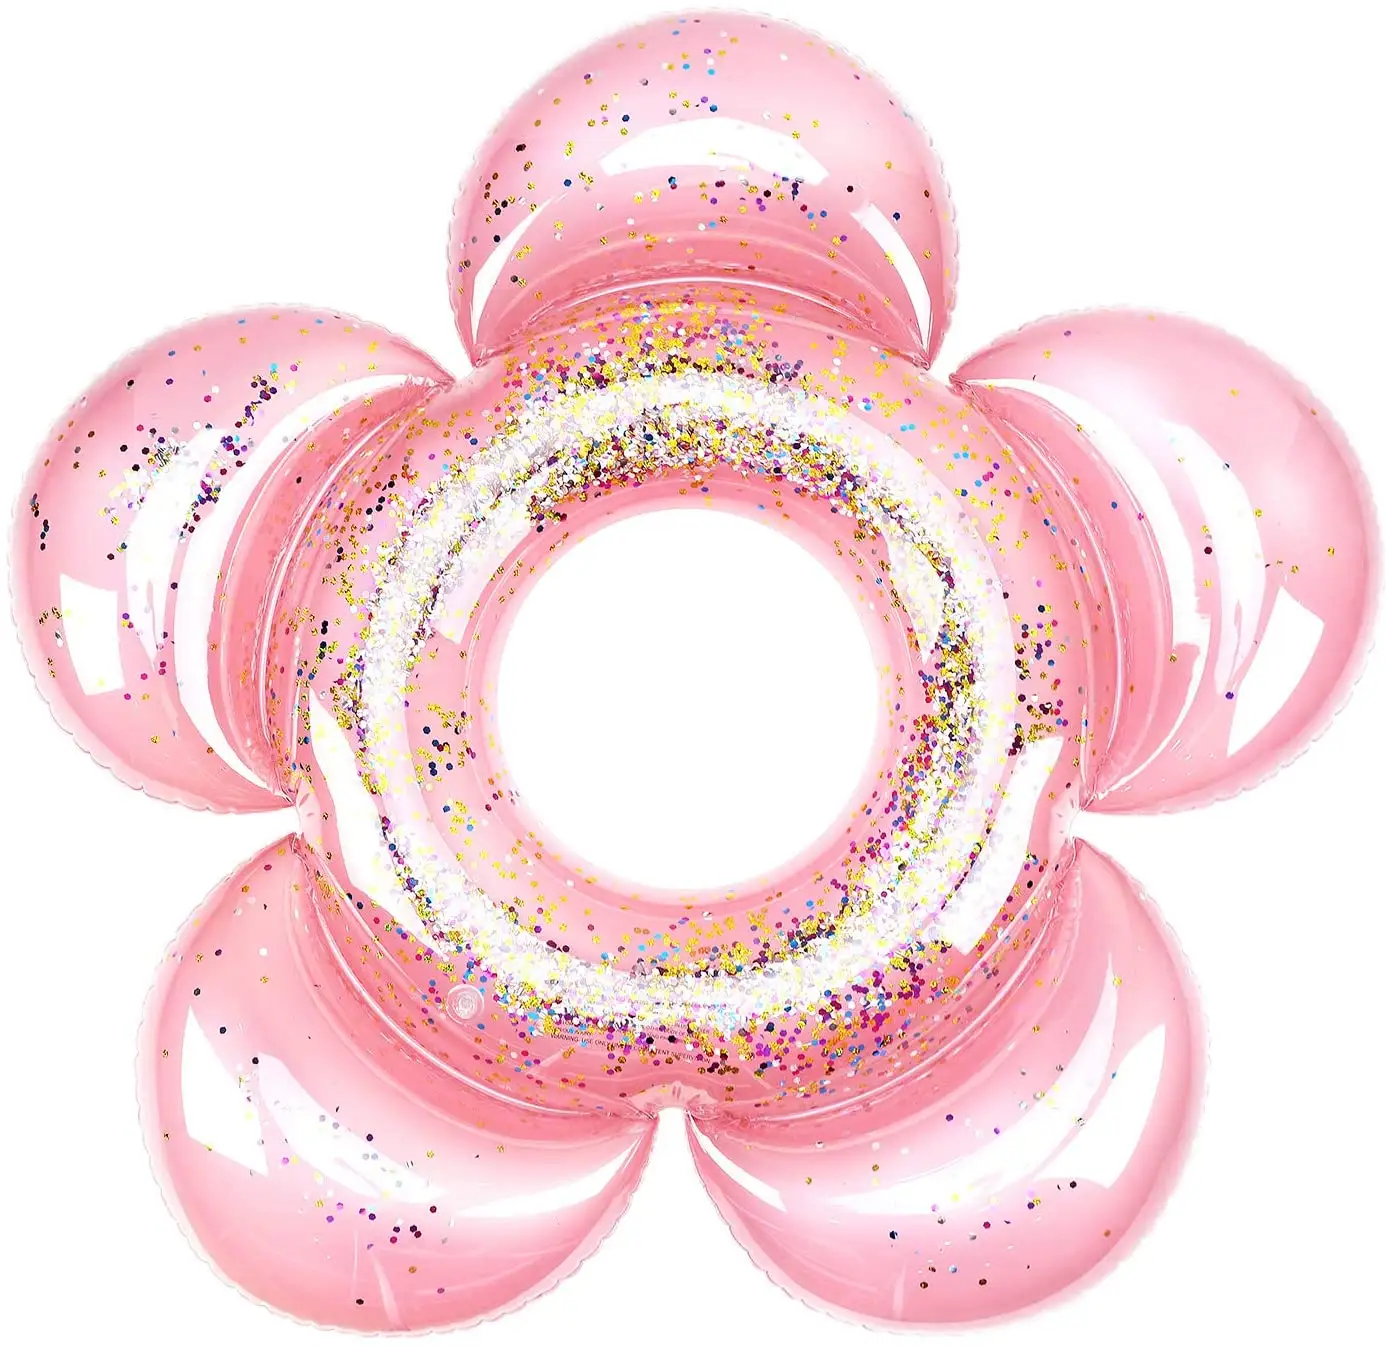 Inflatable Swim Rings with Glitter Flower Shaped Summer Swimming Pool Float Loungers Tube, Water Fun Beach Party Toys